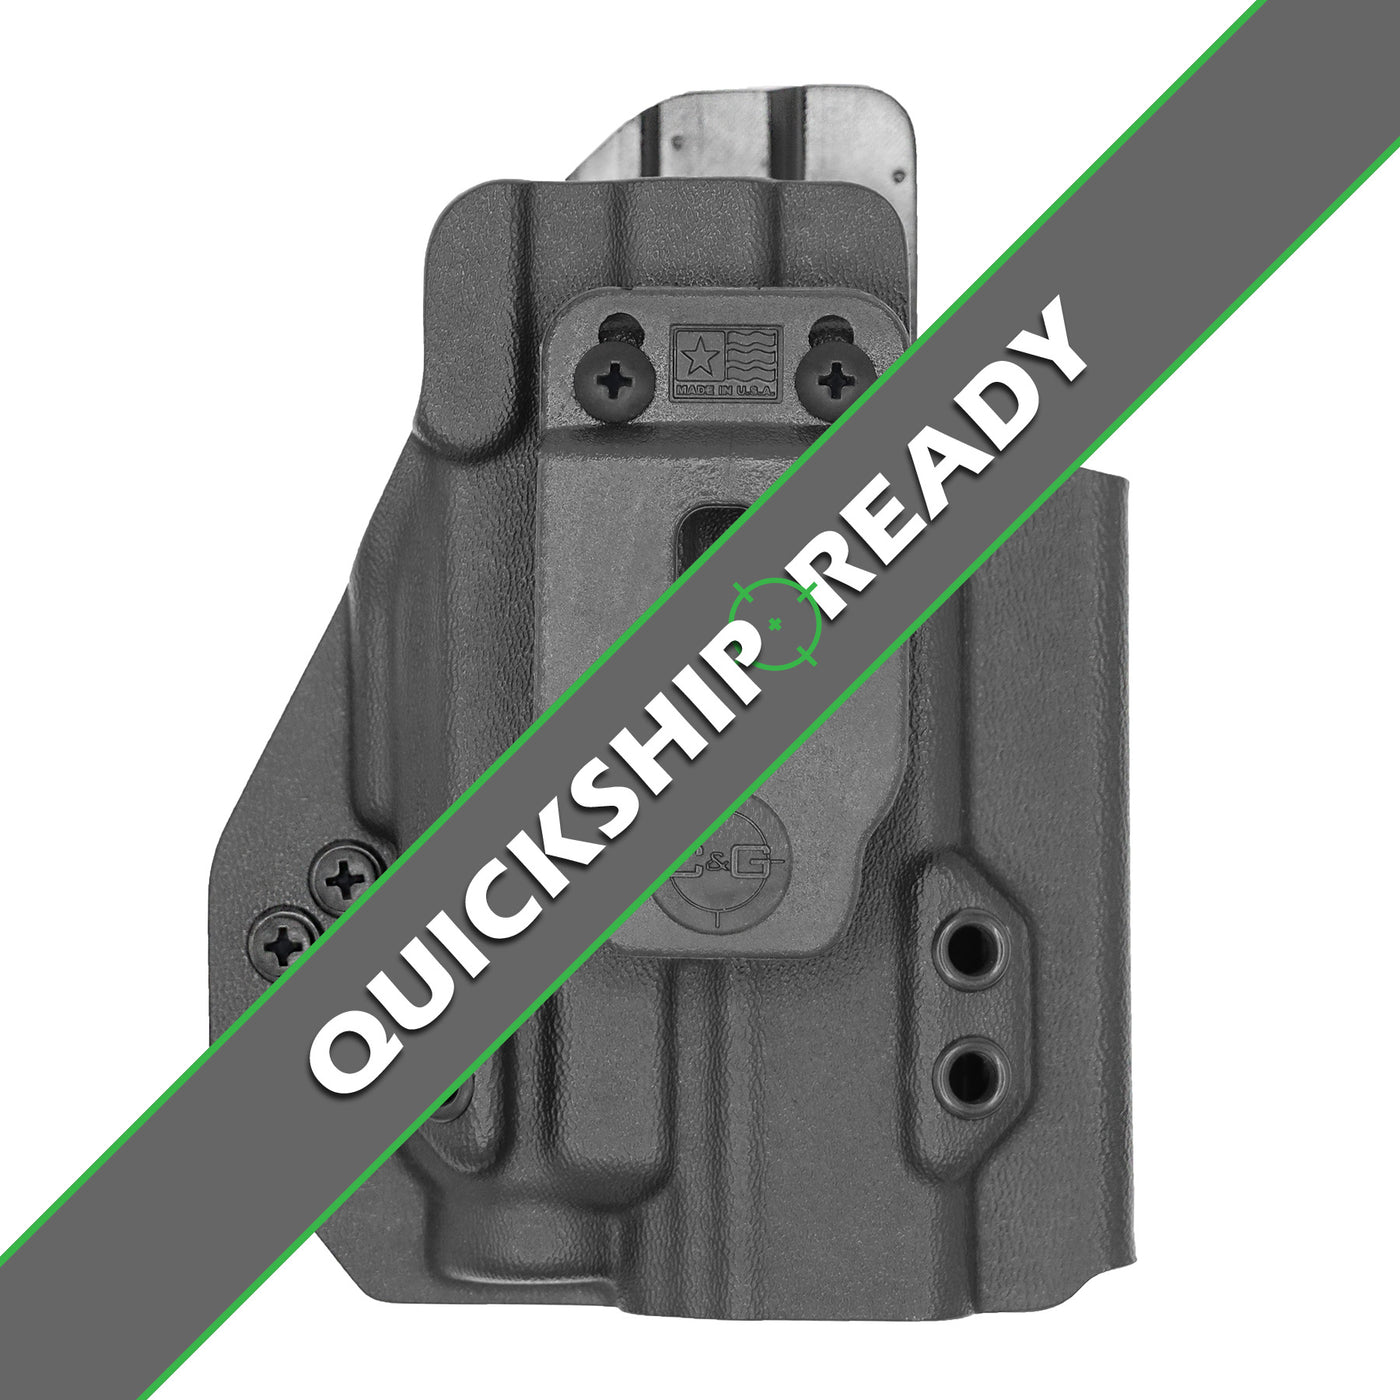 C&G Holsters quickship IWB Tactical CZ p10/c streamlight tlr7/a